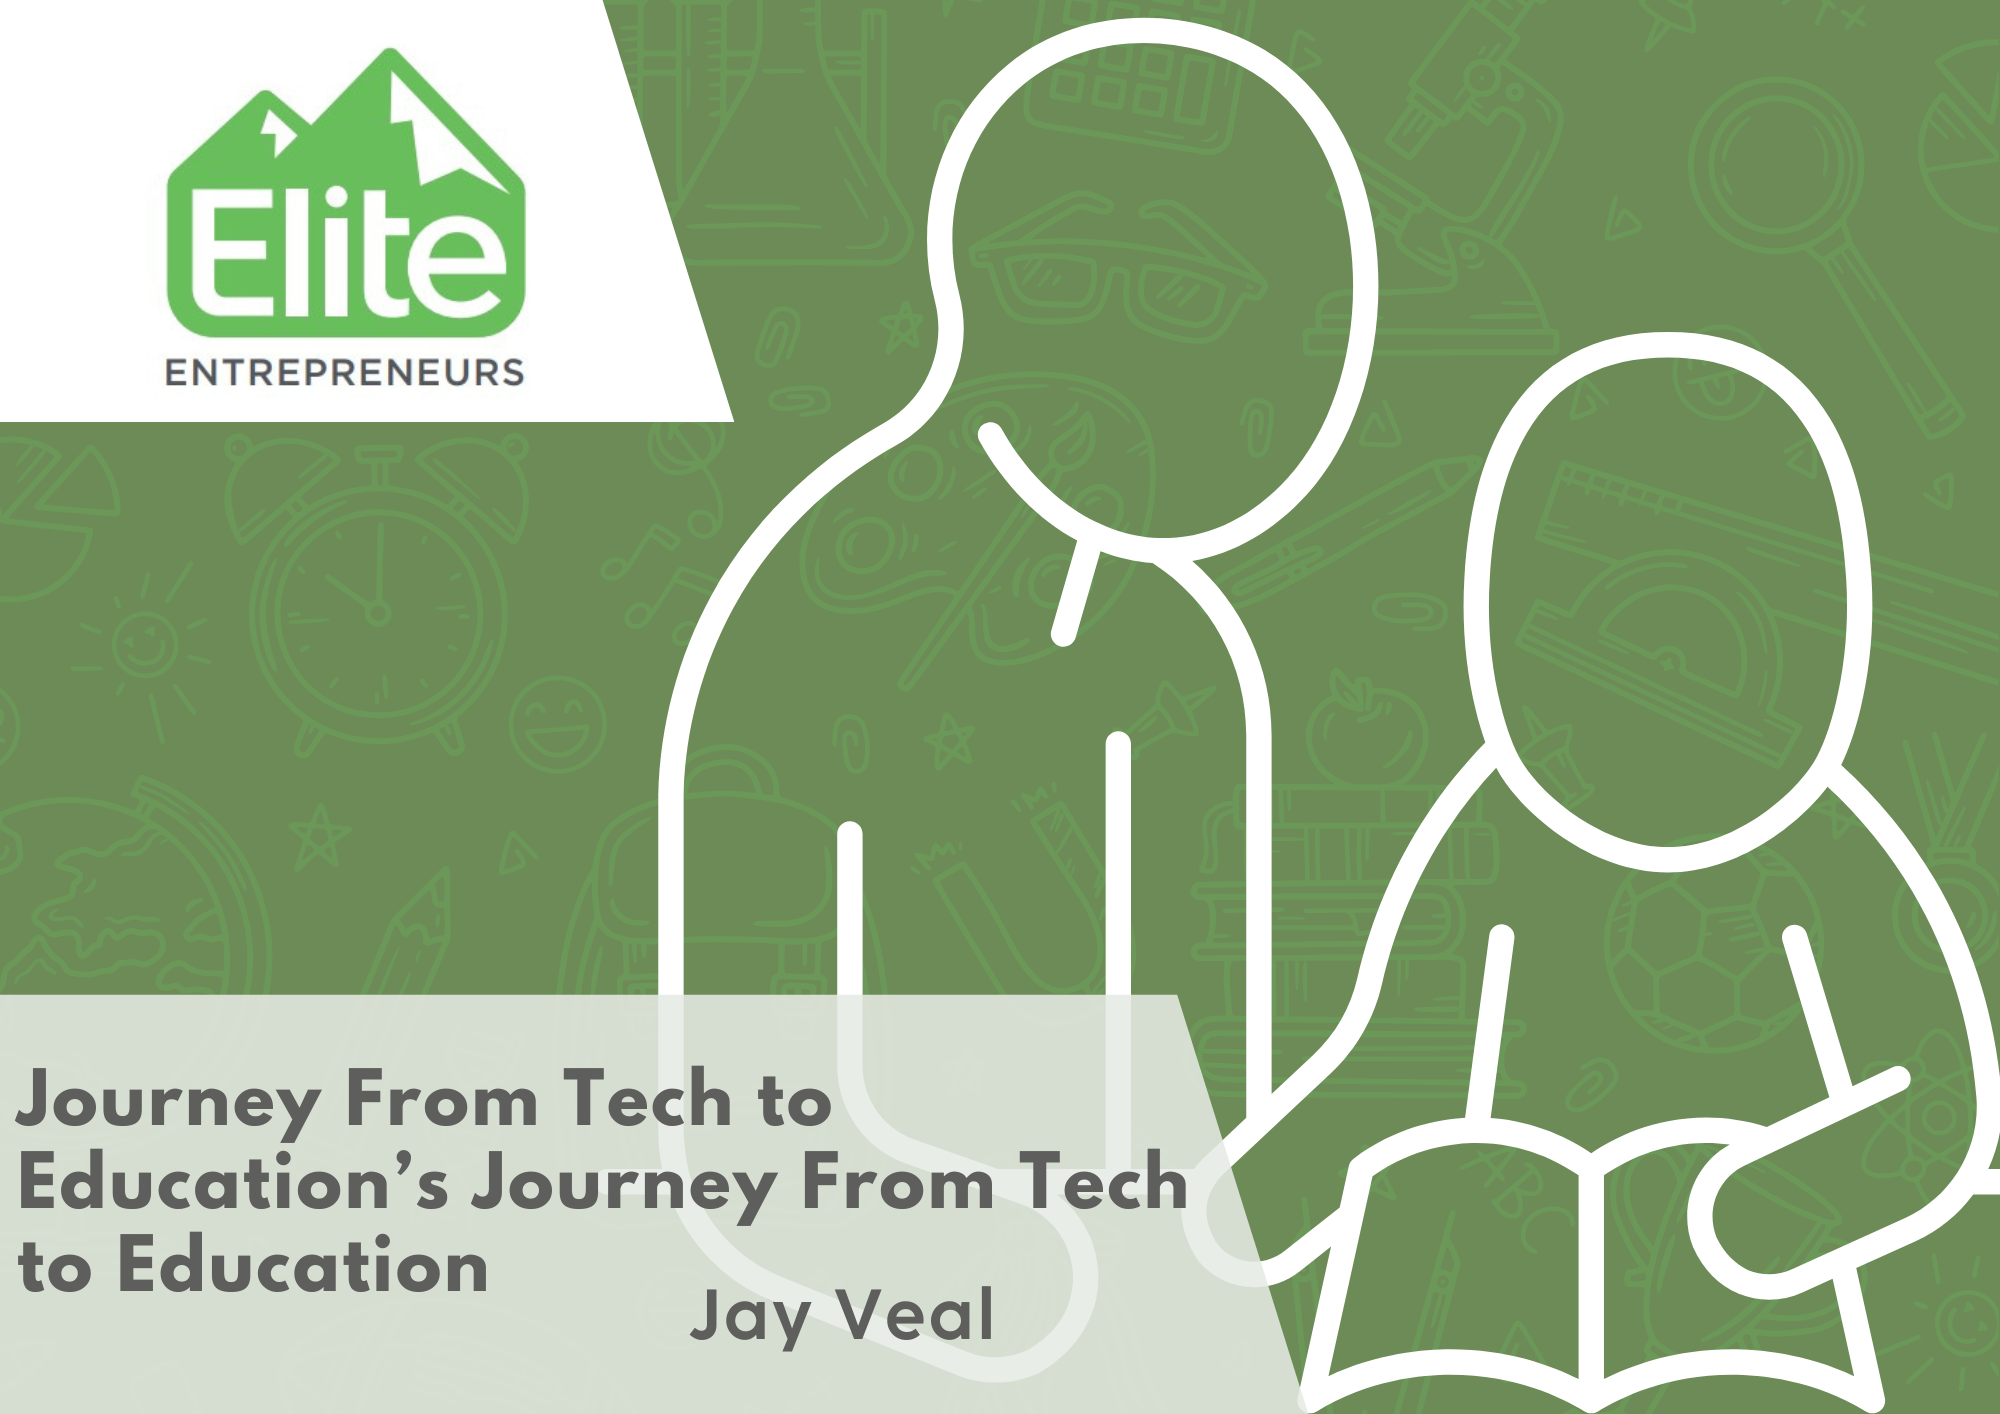 Jay Veal’s Journey From Tech to Education